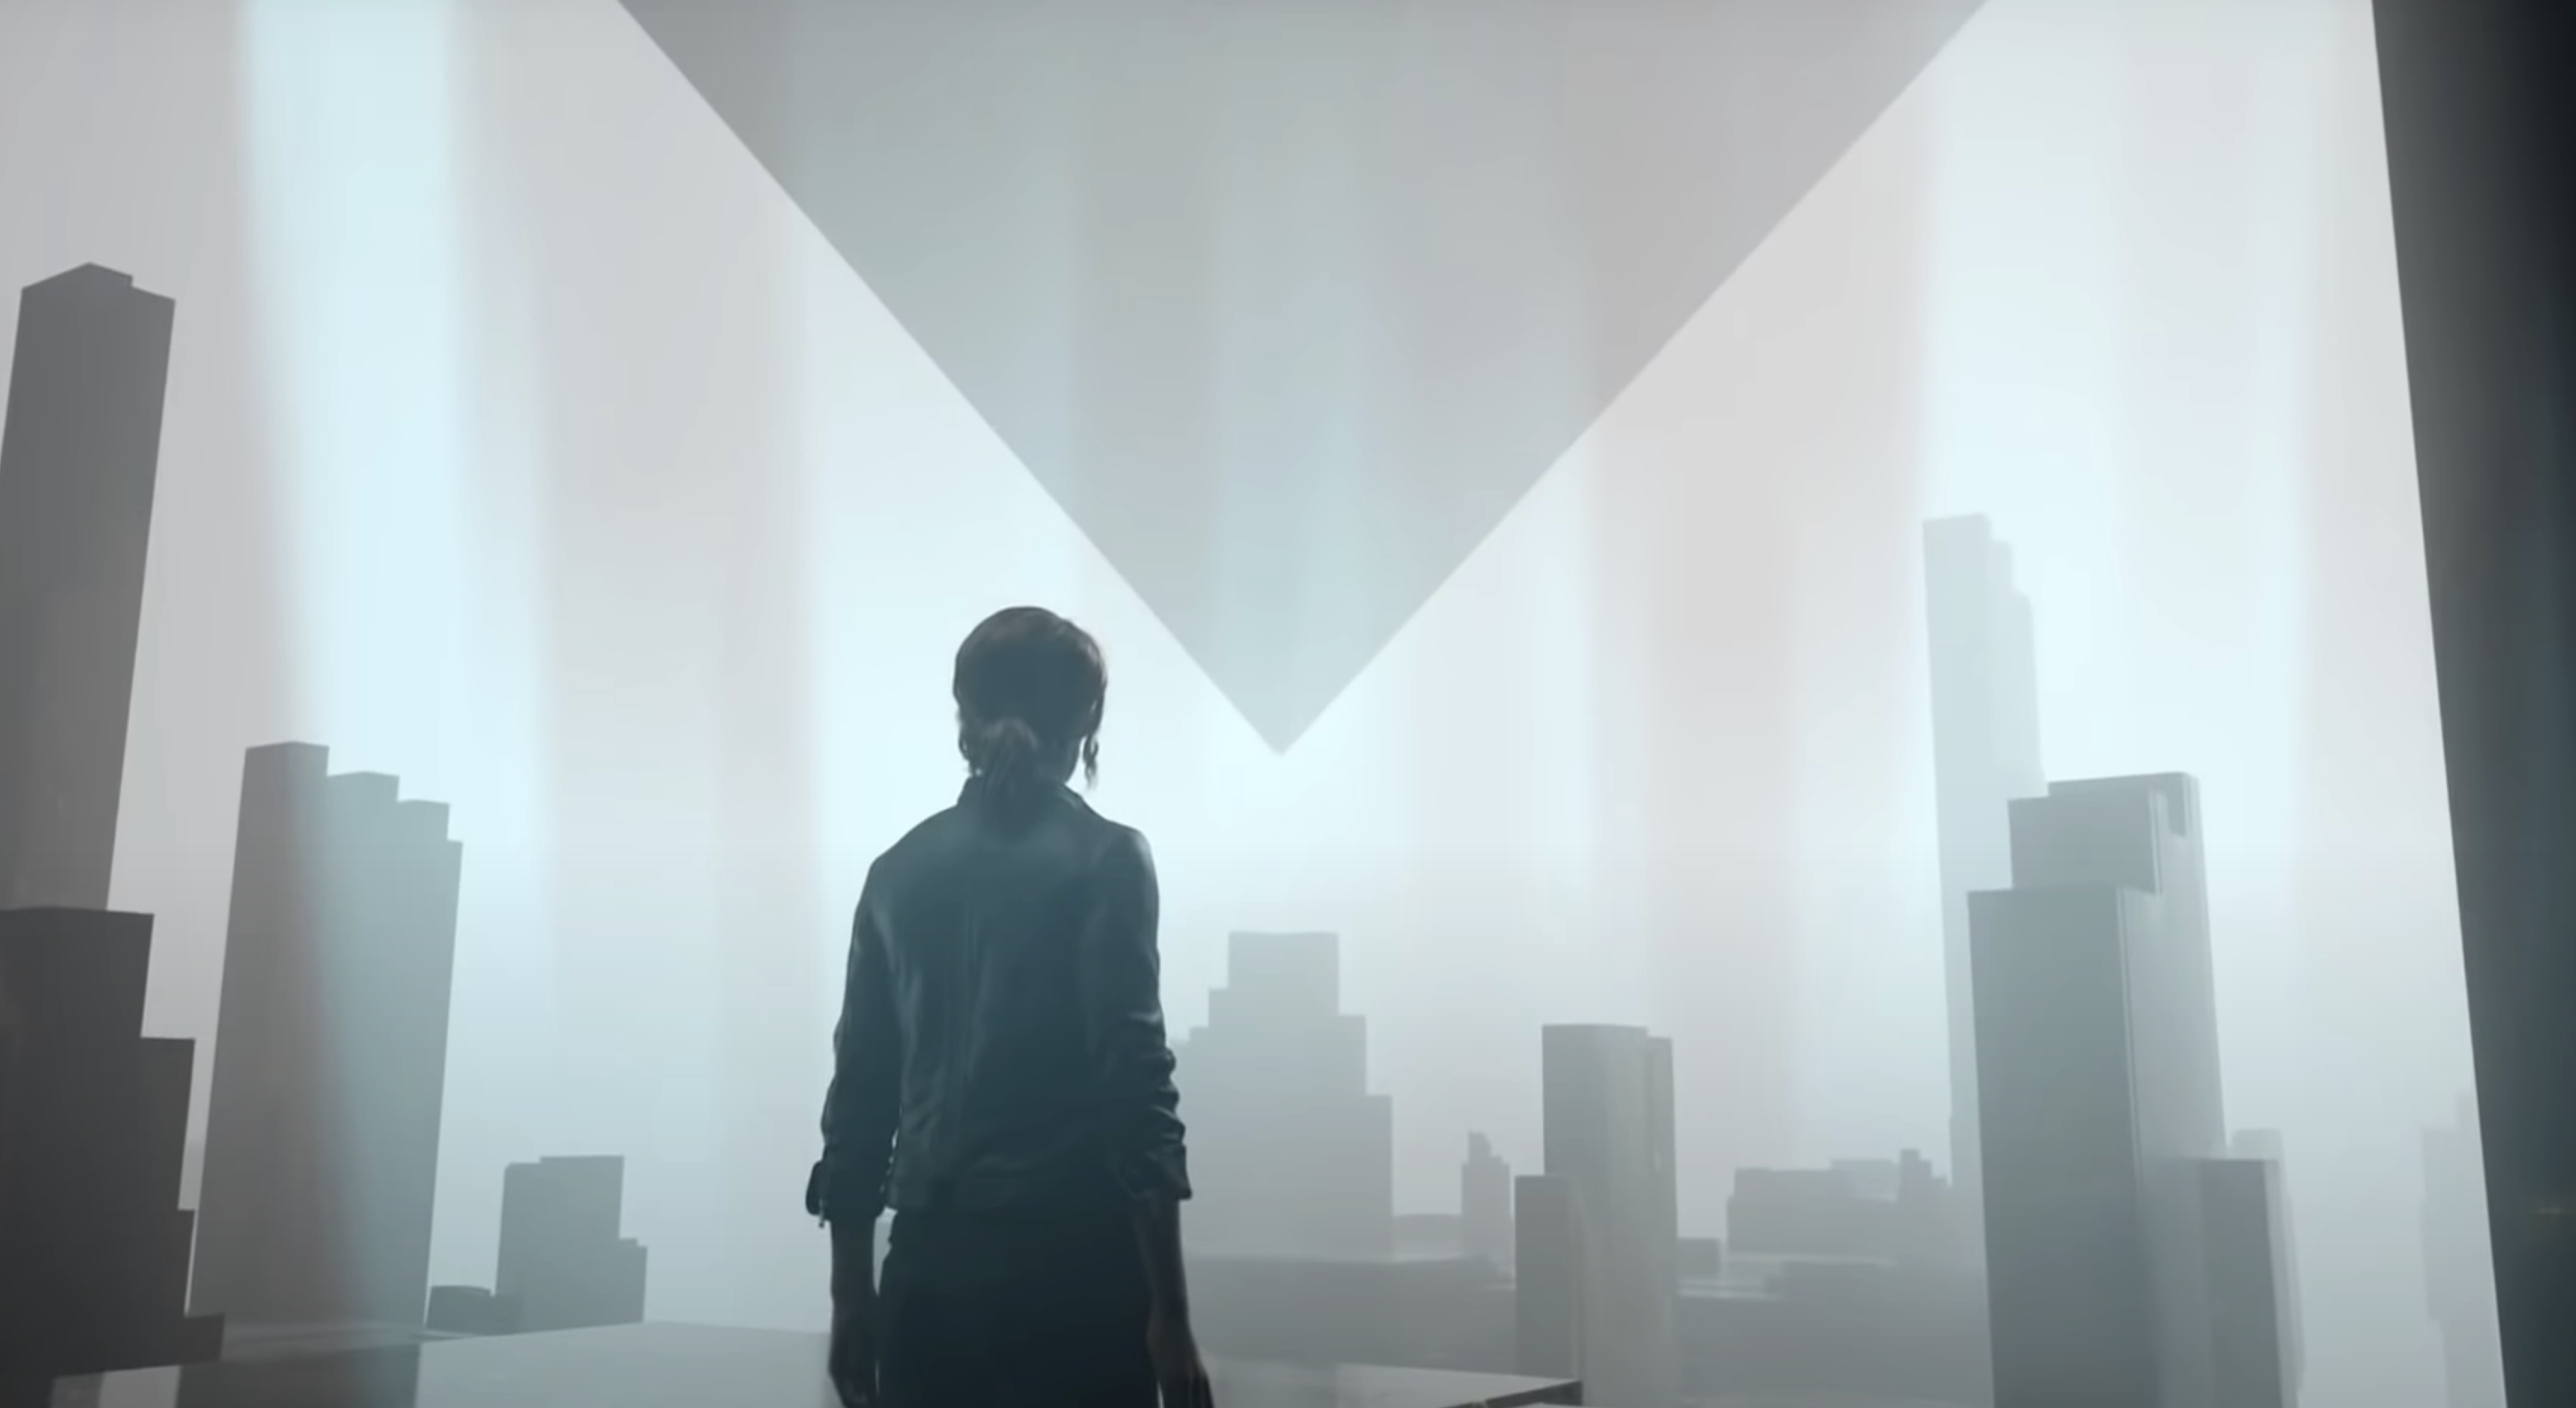 Jesse from Control standing and looking at the Board, which looks like a large inverted pyramid, in the Astral Plane